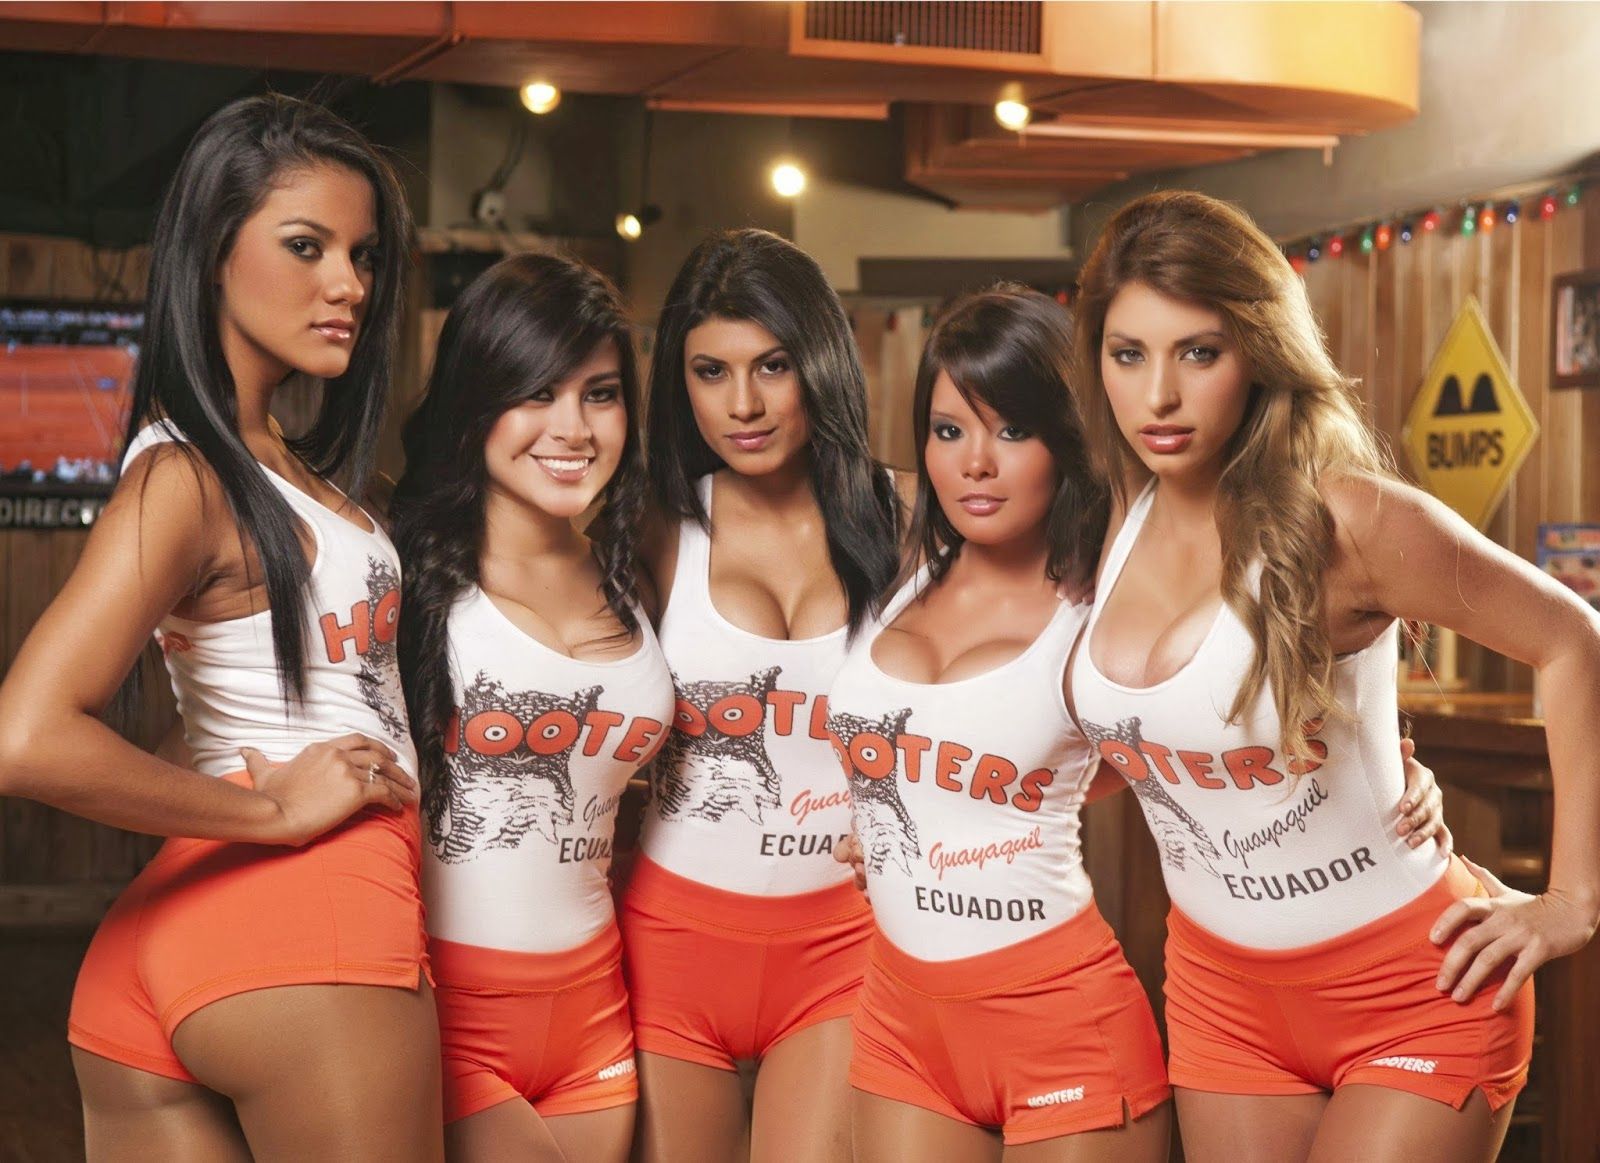 best of Of Sexy hooters girls